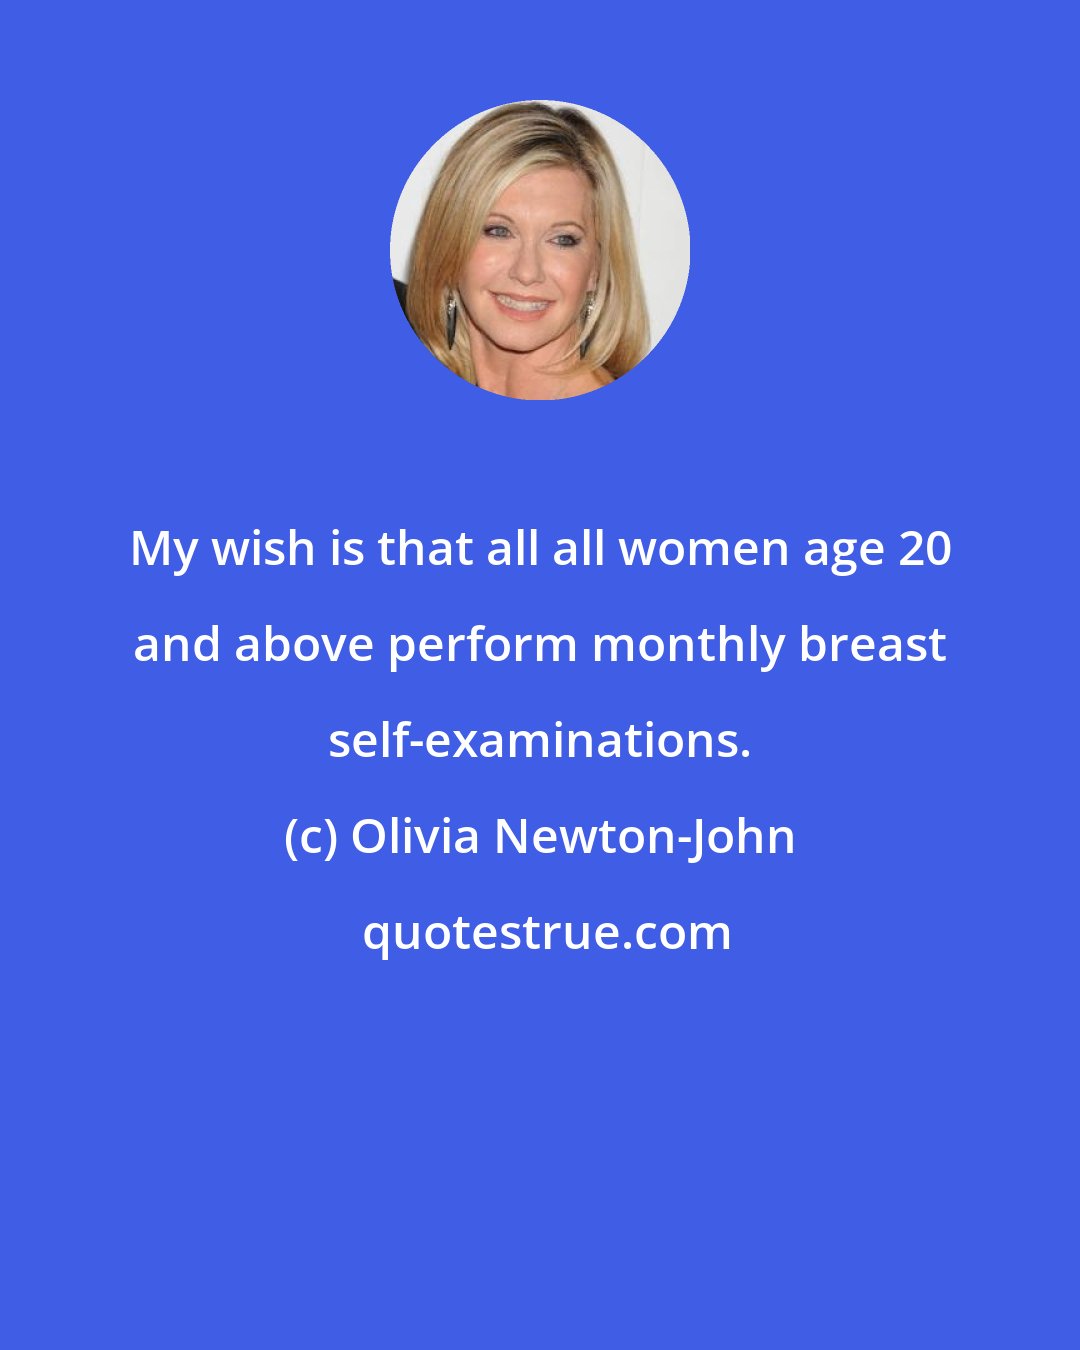 Olivia Newton-John: My wish is that all all women age 20 and above perform monthly breast self-examinations.